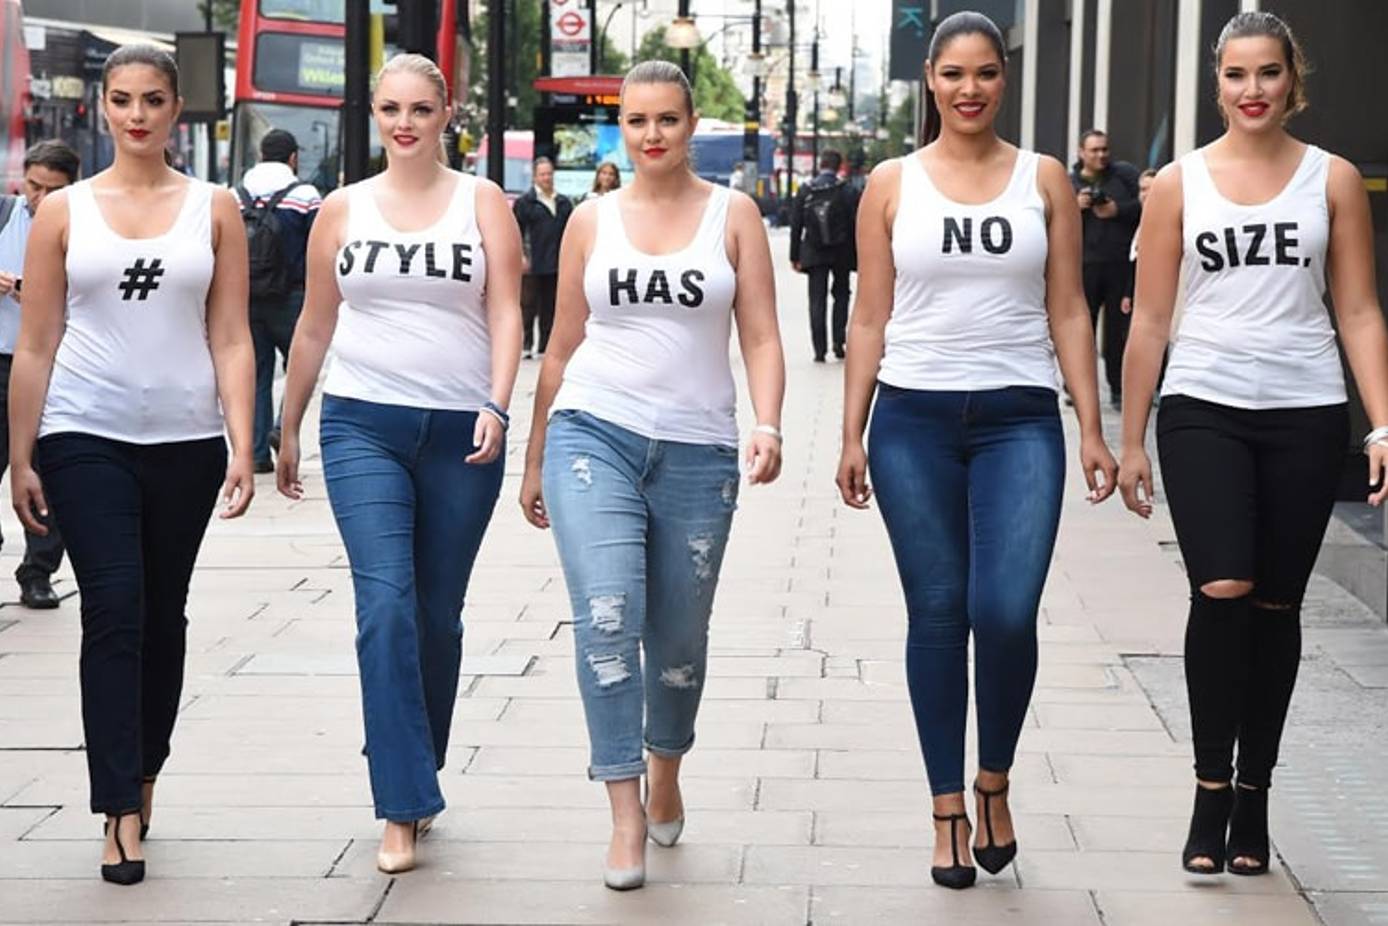 Plus-size clothing ranges leading to higher in the UK, says study